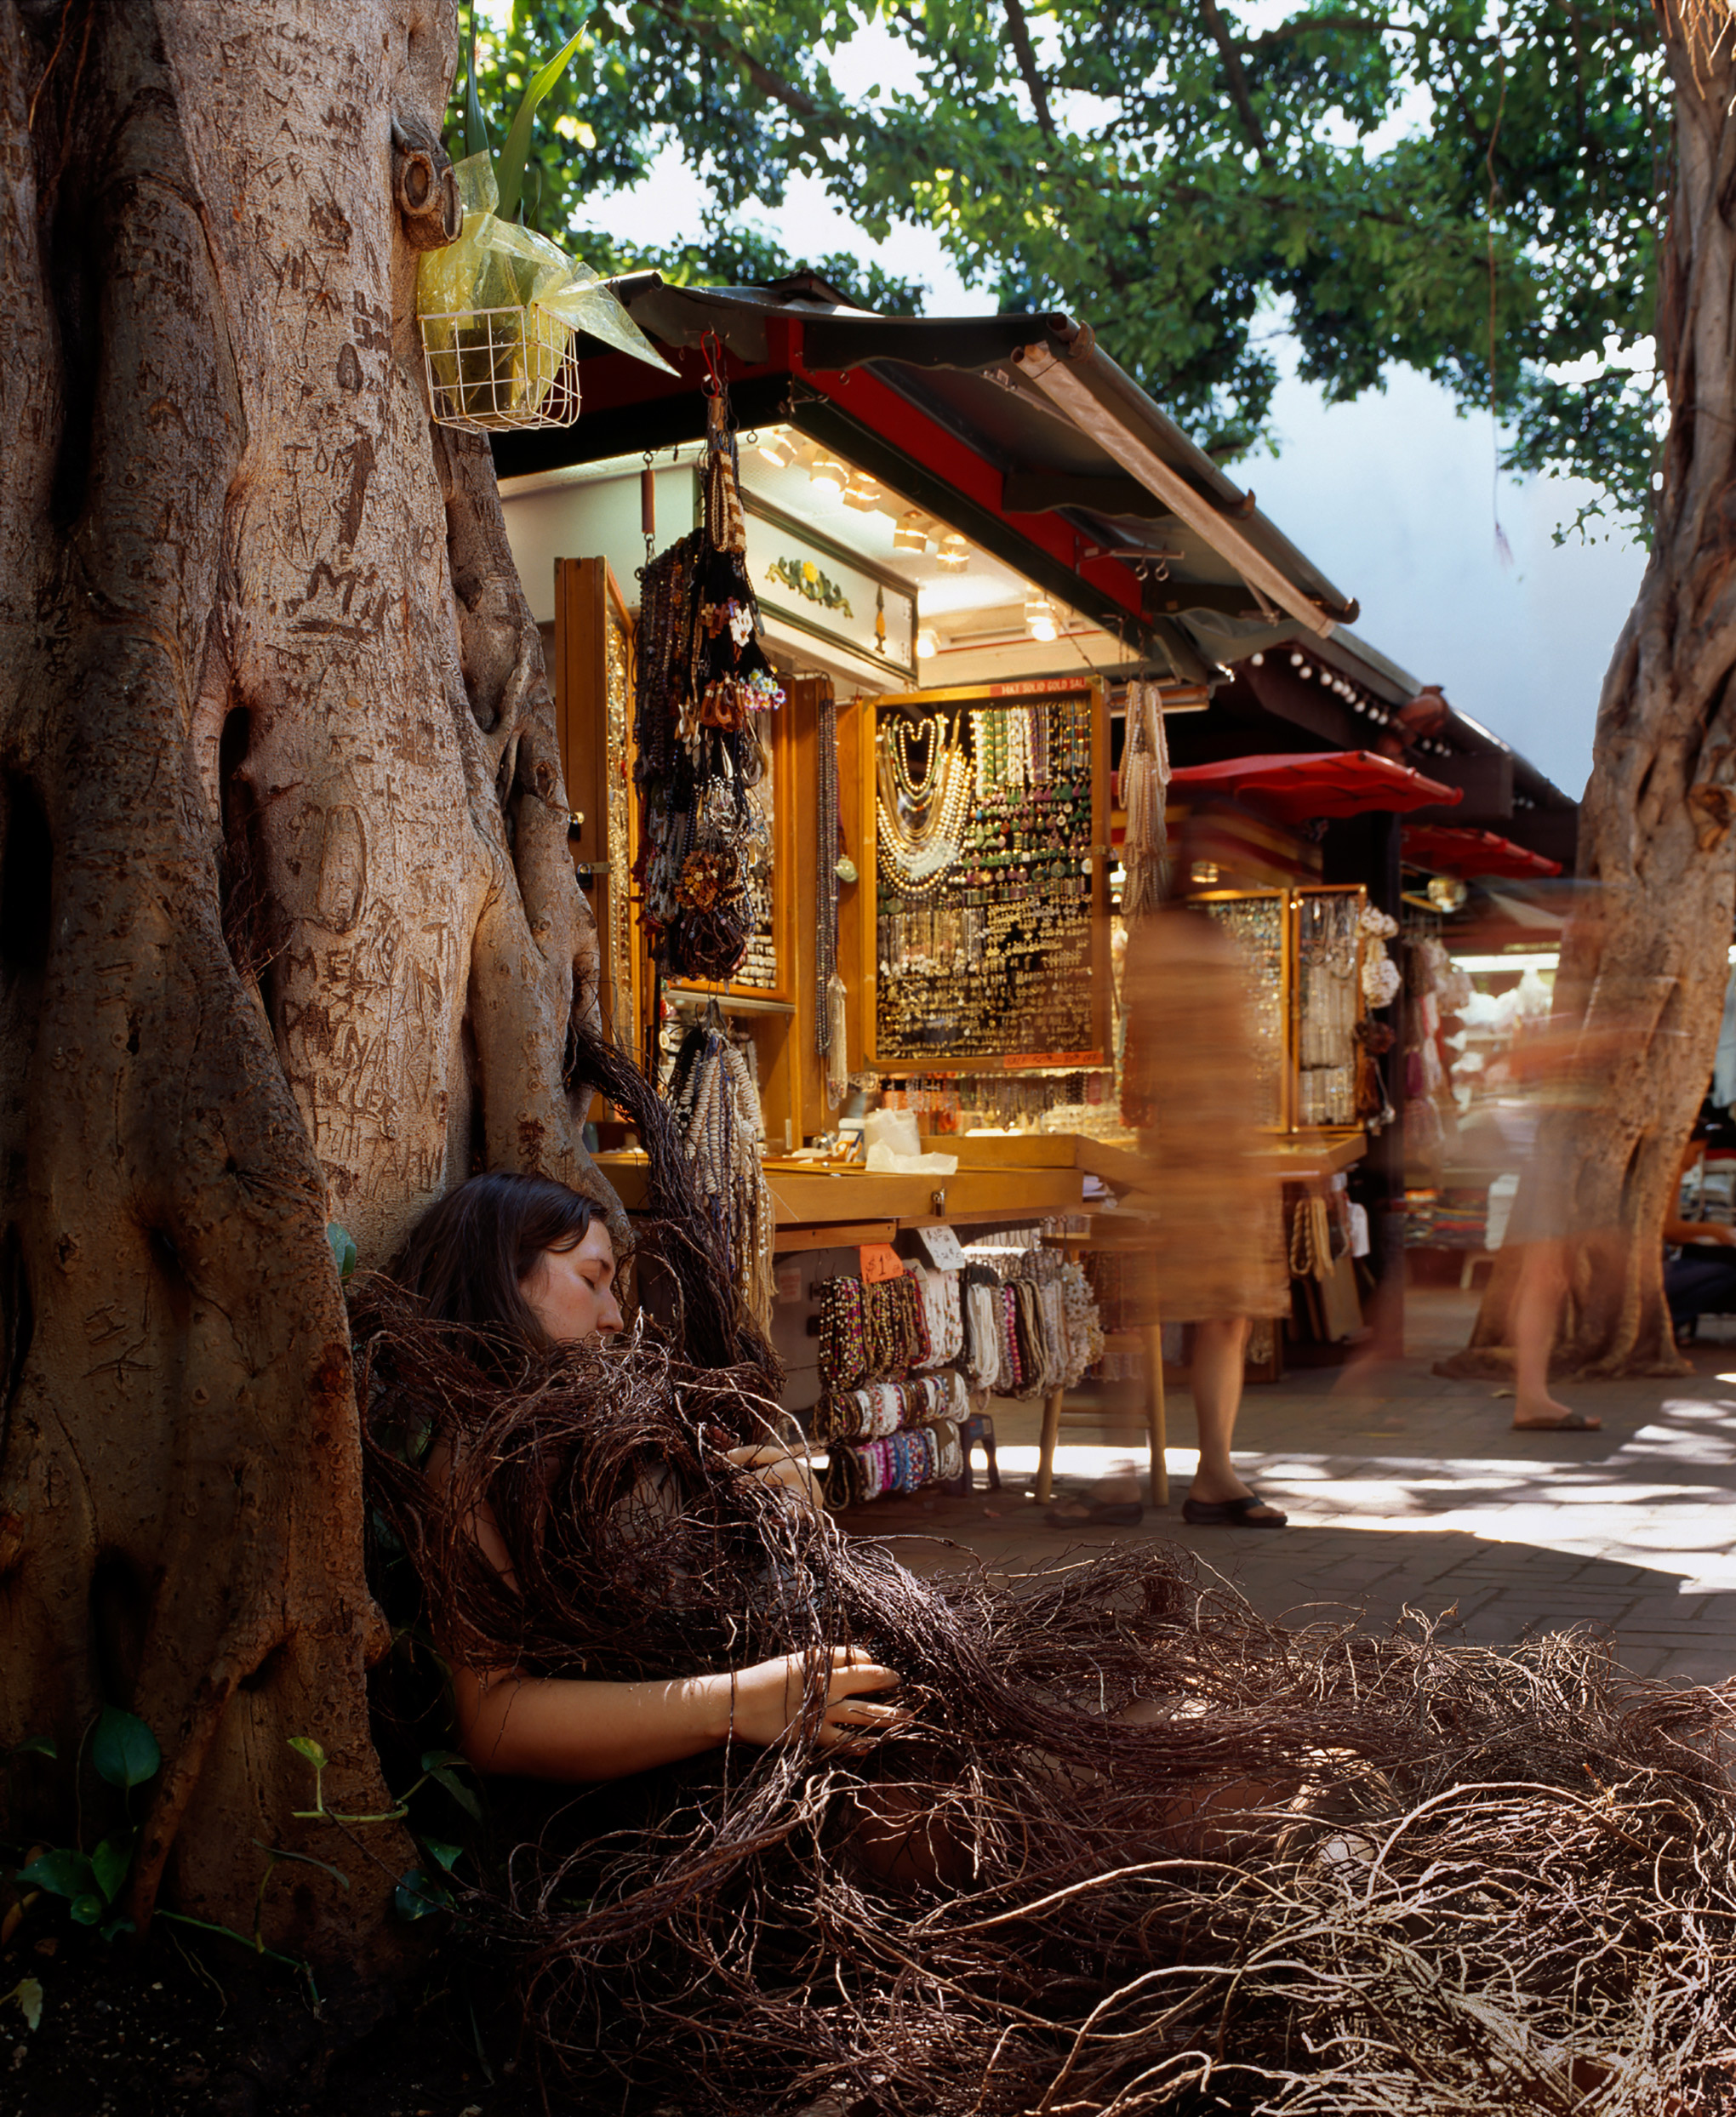 Searching for Roots in the International Marketplace/ Pa’i A’a Kapa